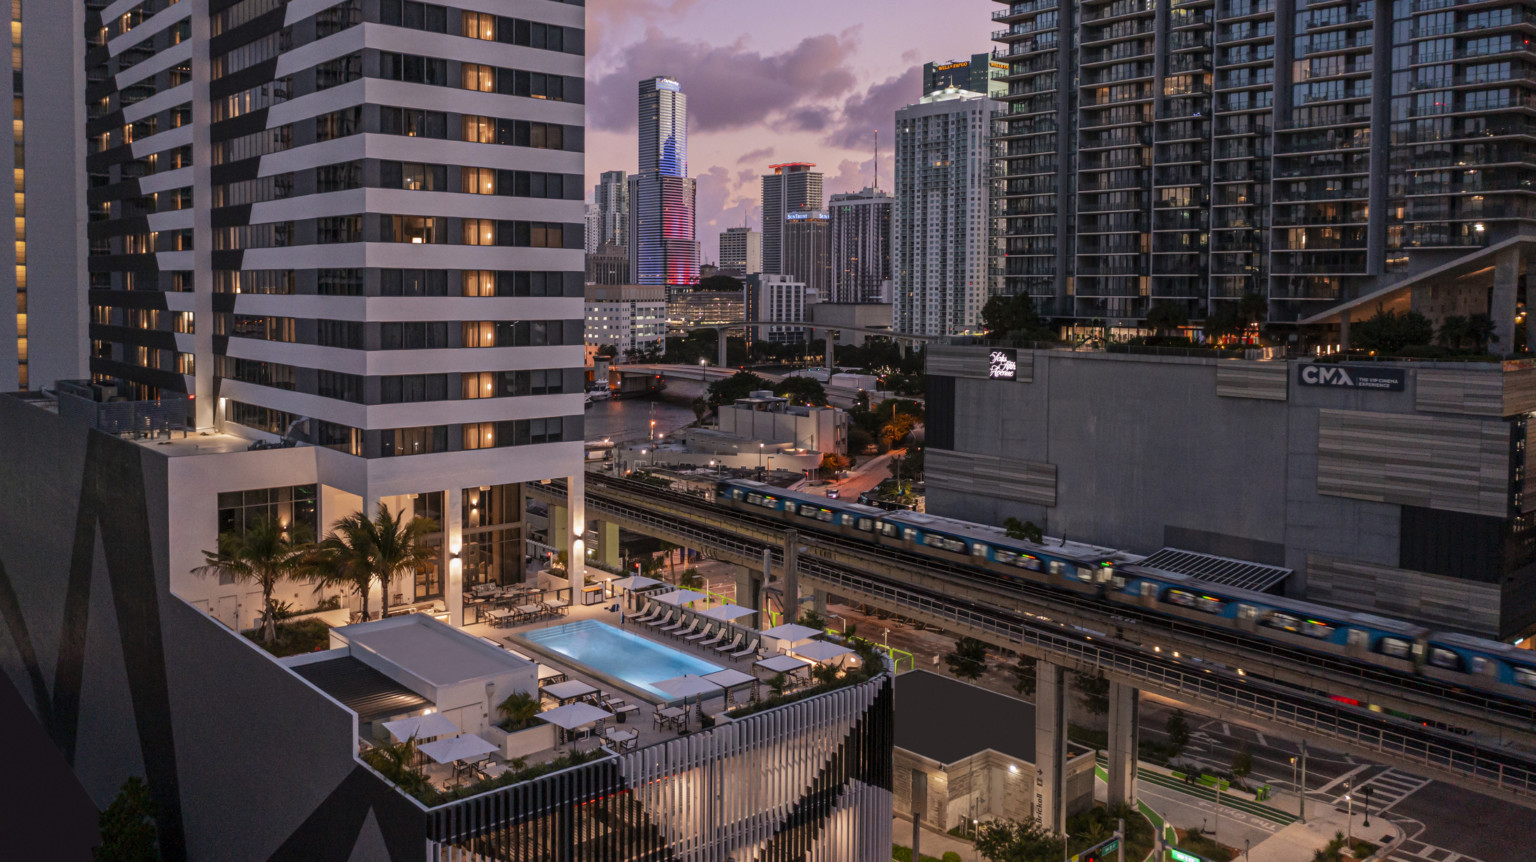 AC Hotel by Marriott & Element Miami Brickell, a tall tower with midlevel patio and outdoor pool with seating area in downtown Miami surrounded by tall buildings